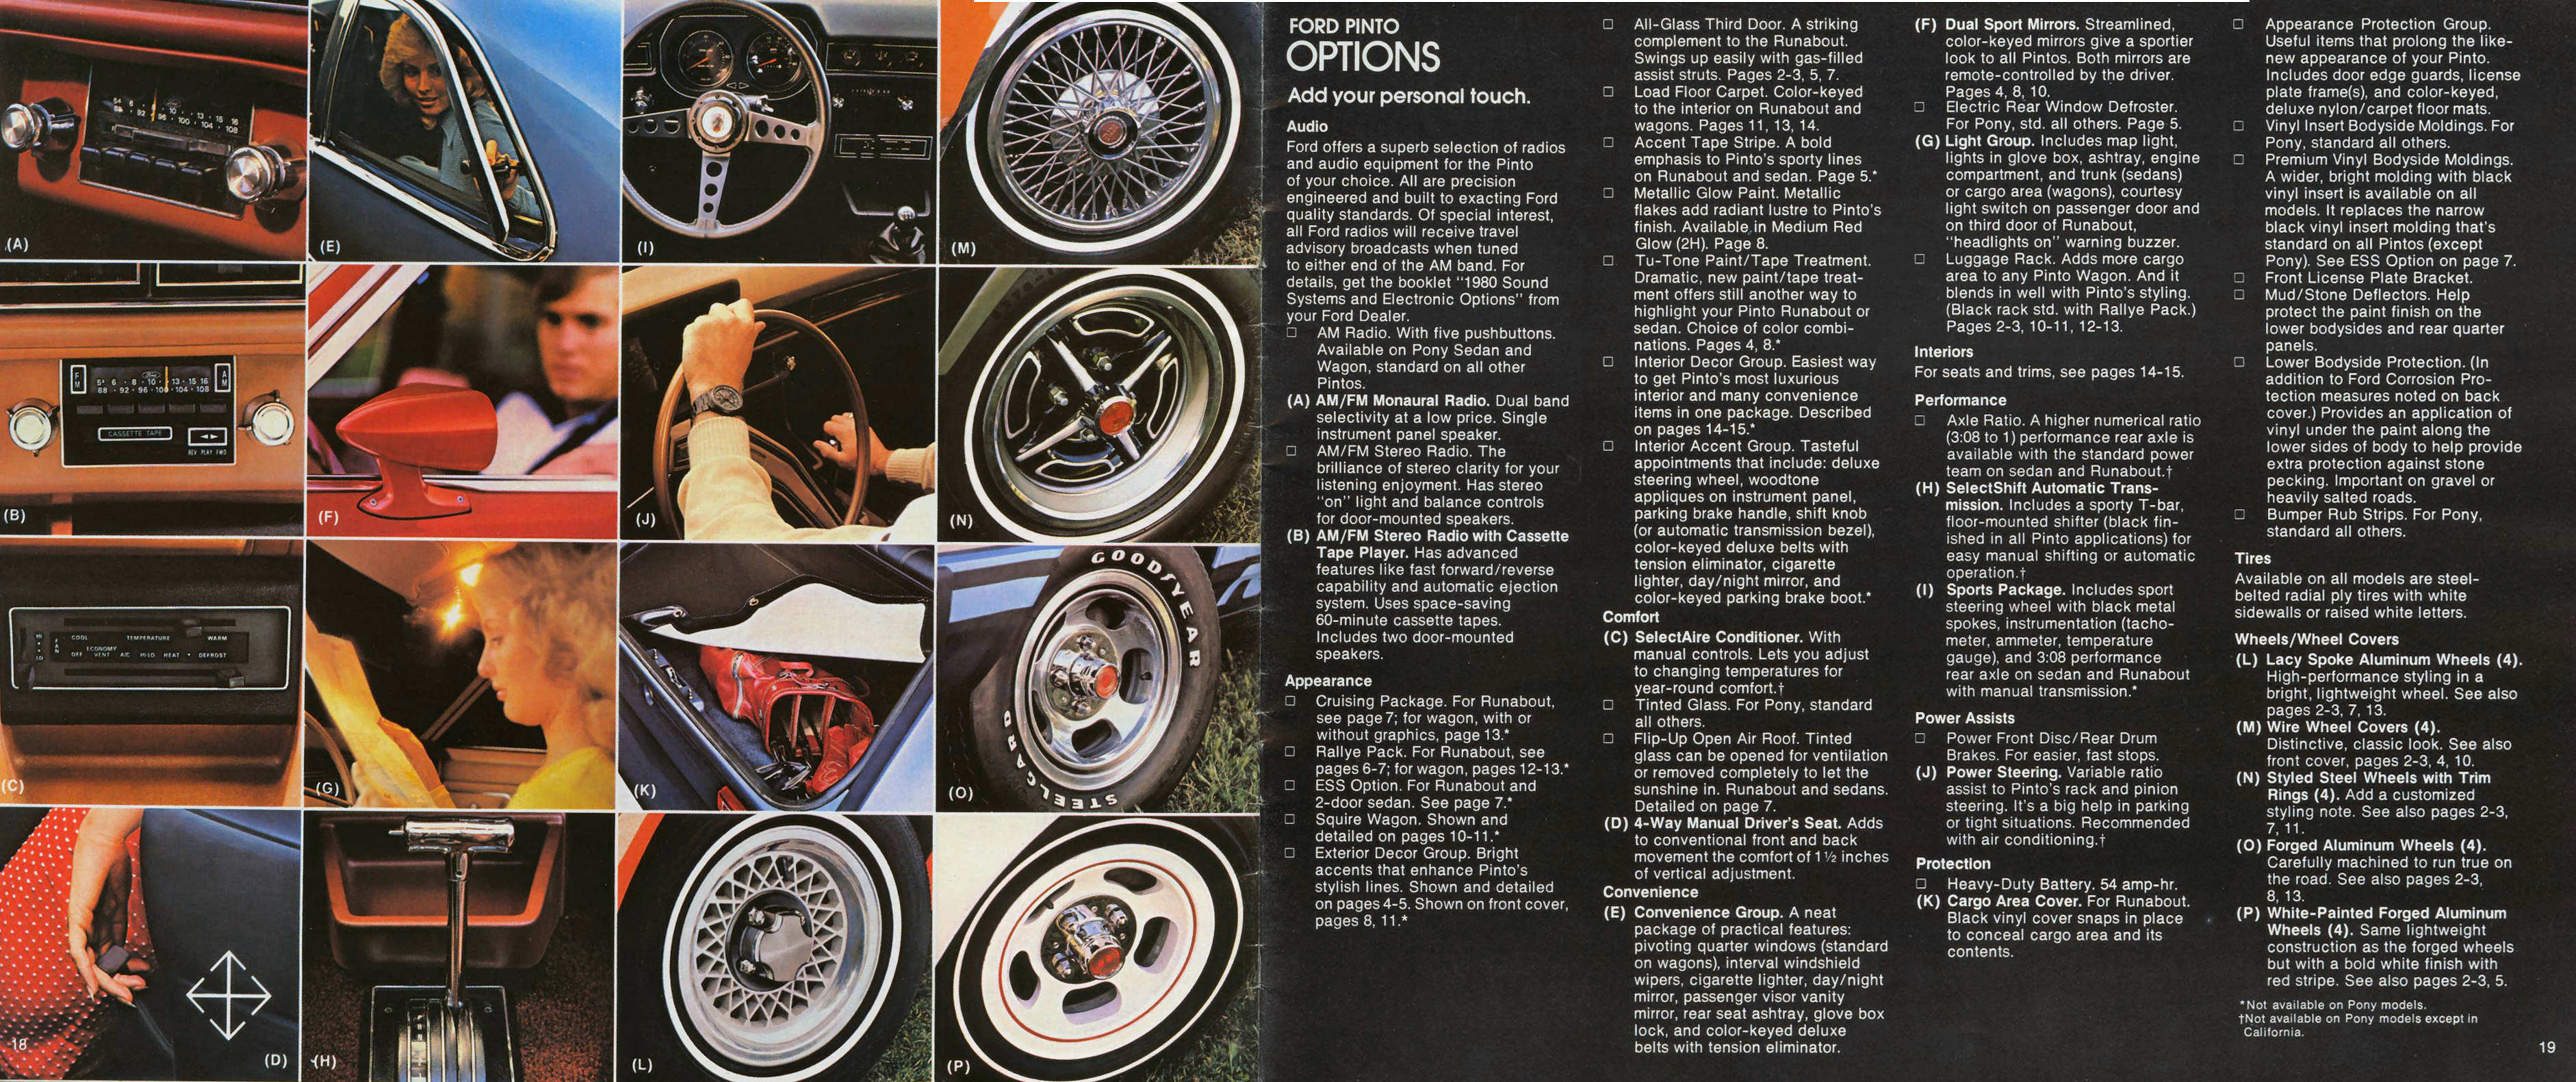 1980_Ford_Pinto-18-19